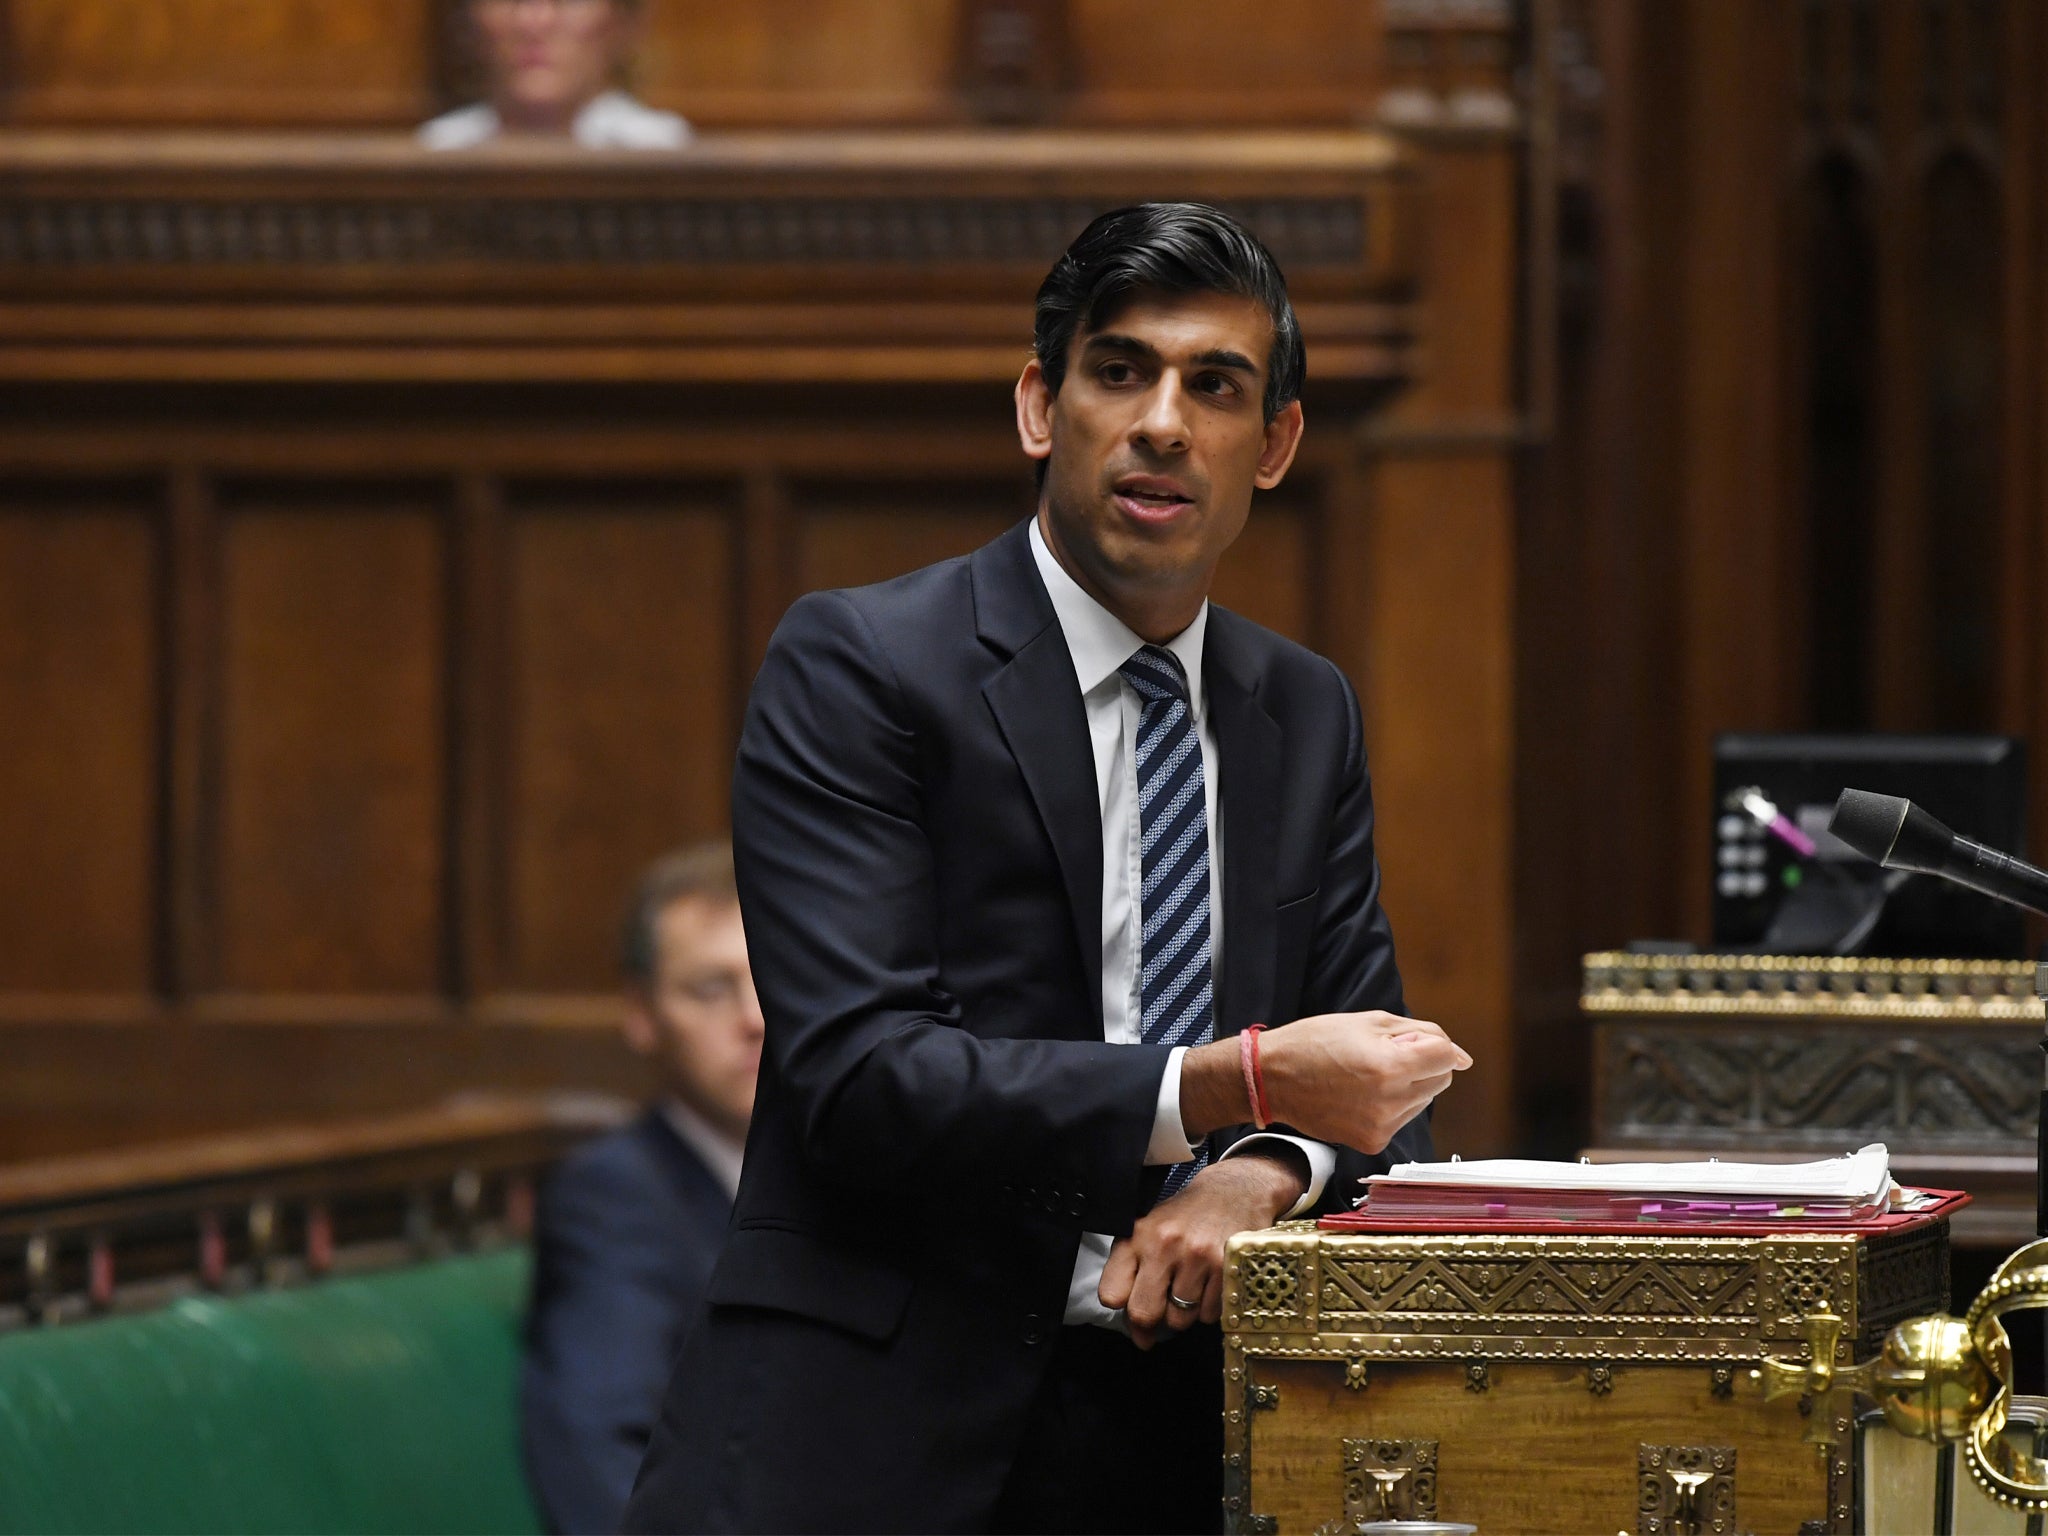 Britain’s Chancellor of the Exchequer Rishi Sunak announced yesterday government tier 2 business and worker support